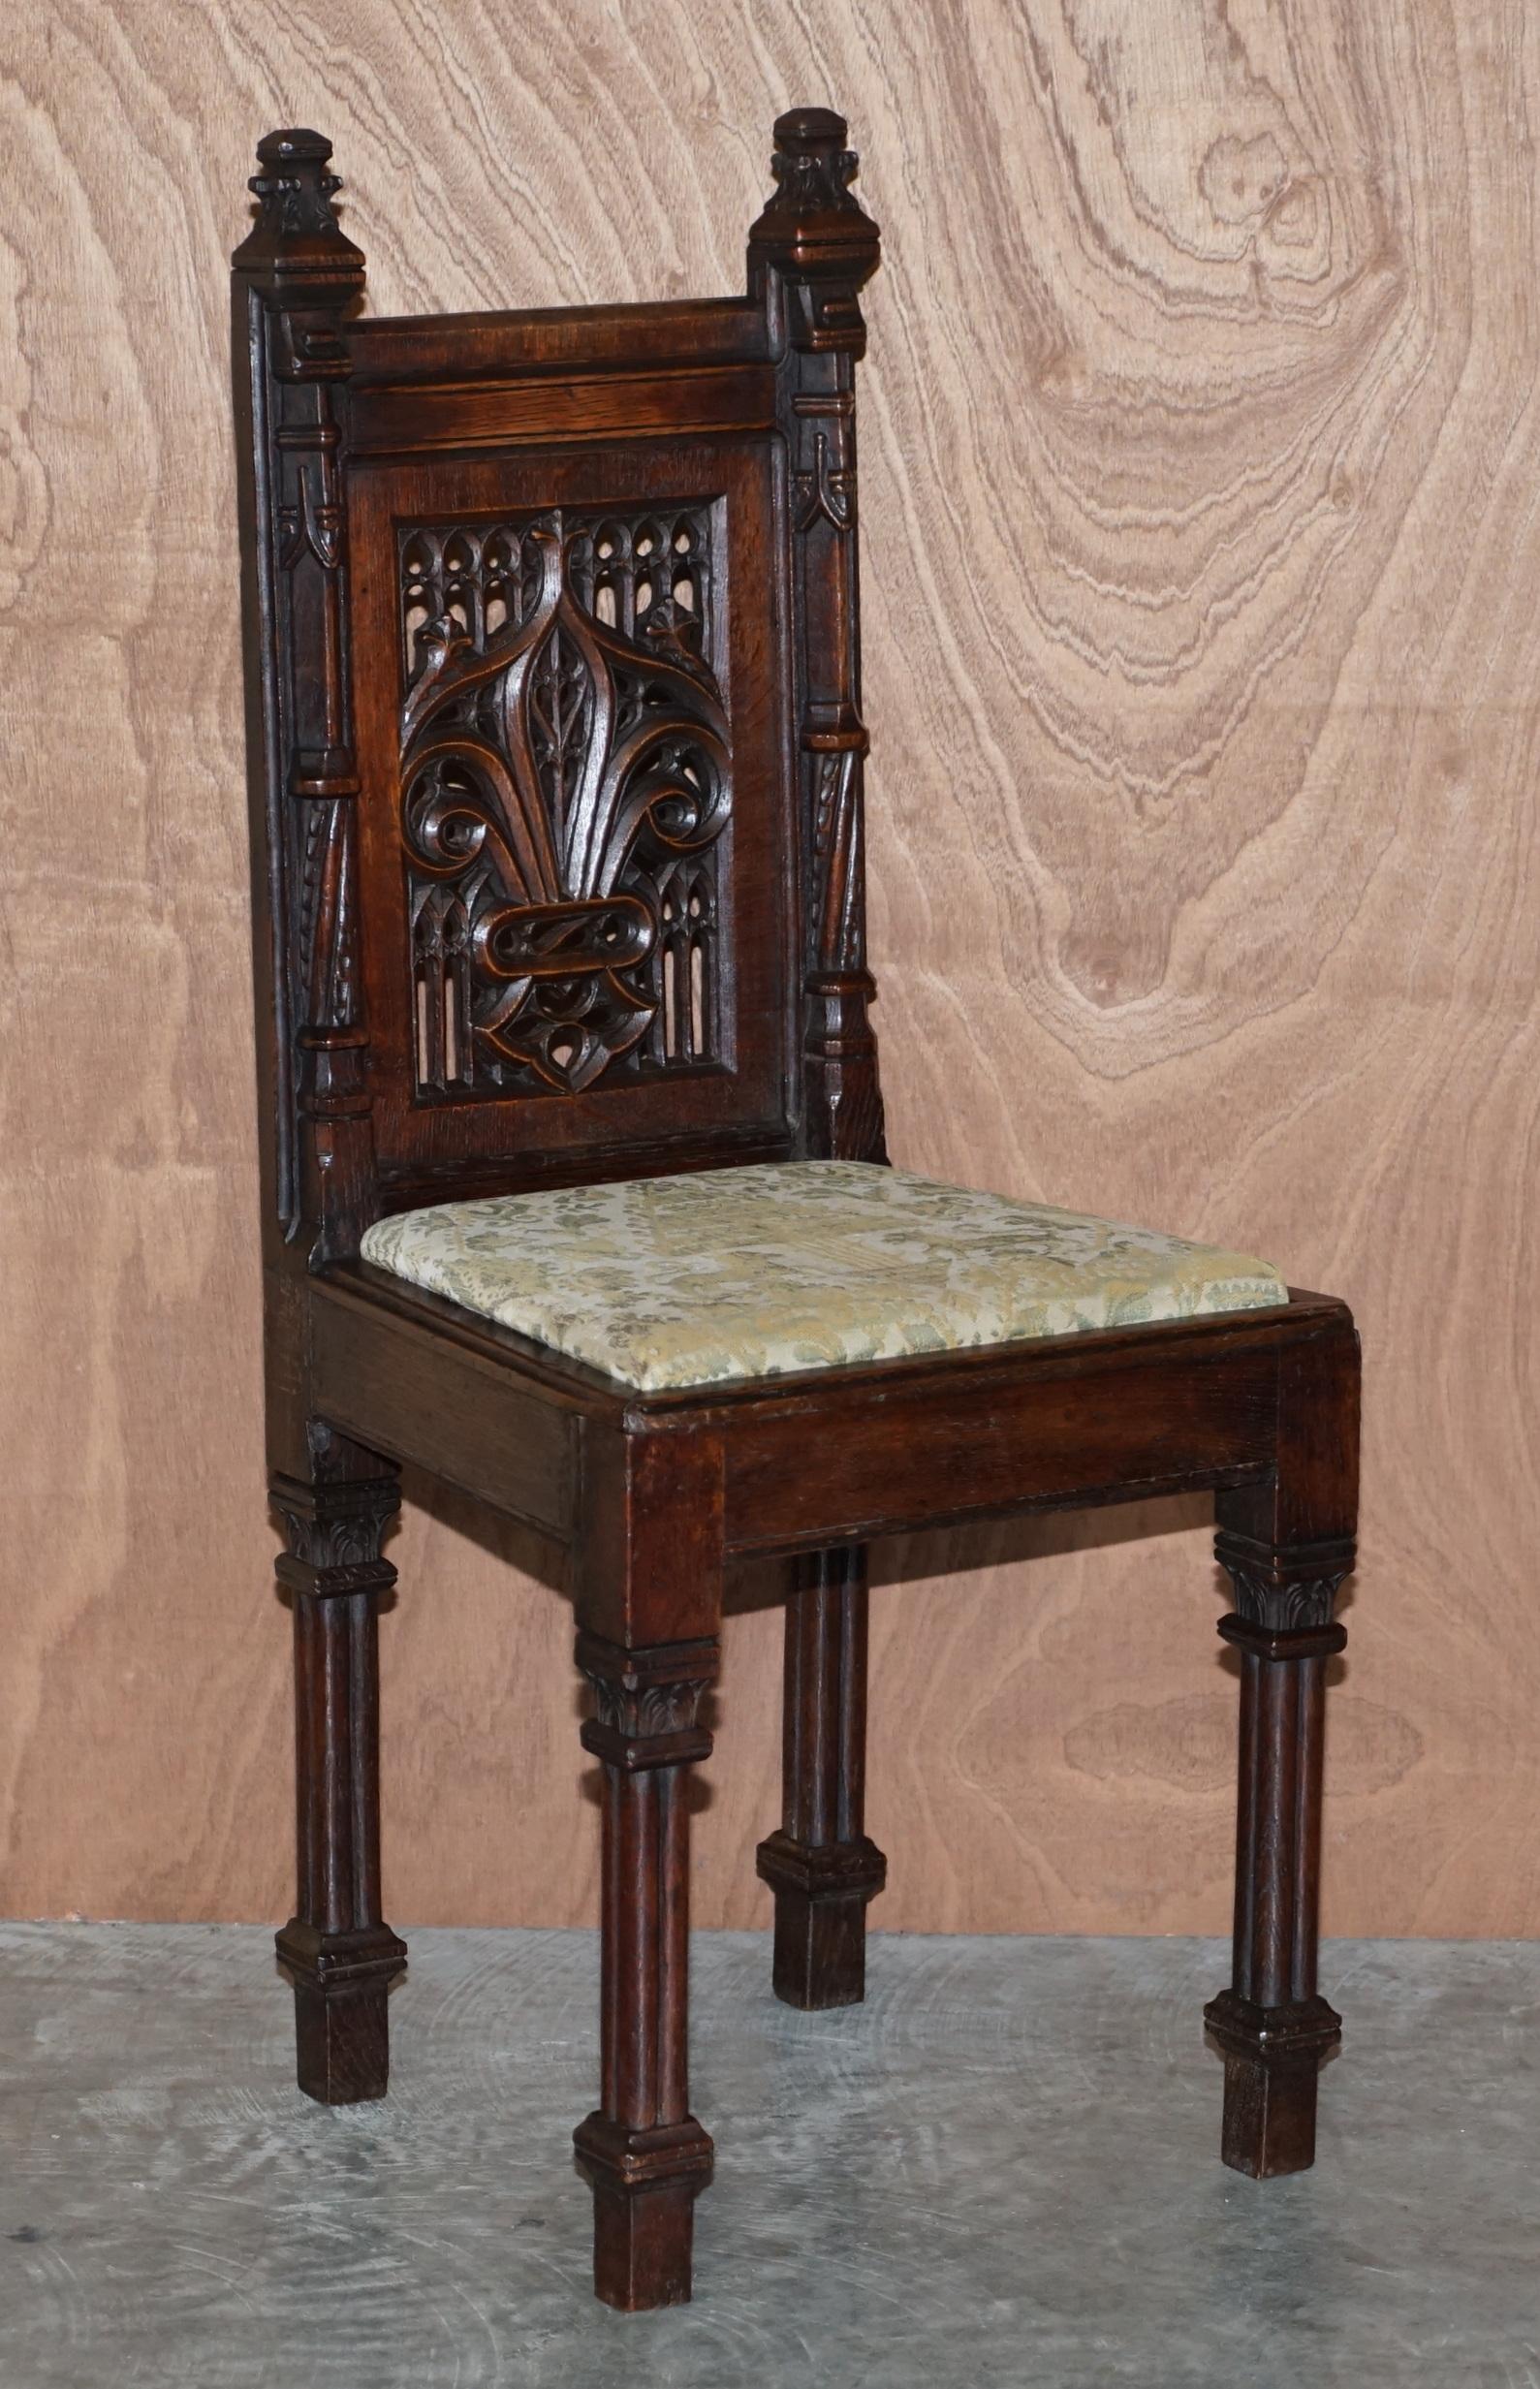 We are delighted to offer this stunning suite of twelve circa 1800 Gothic revival, hand carved oak dining chairs with early silk embroidered upholstery, most likely from France

These chairs were purchased by a private client over 20 years, they